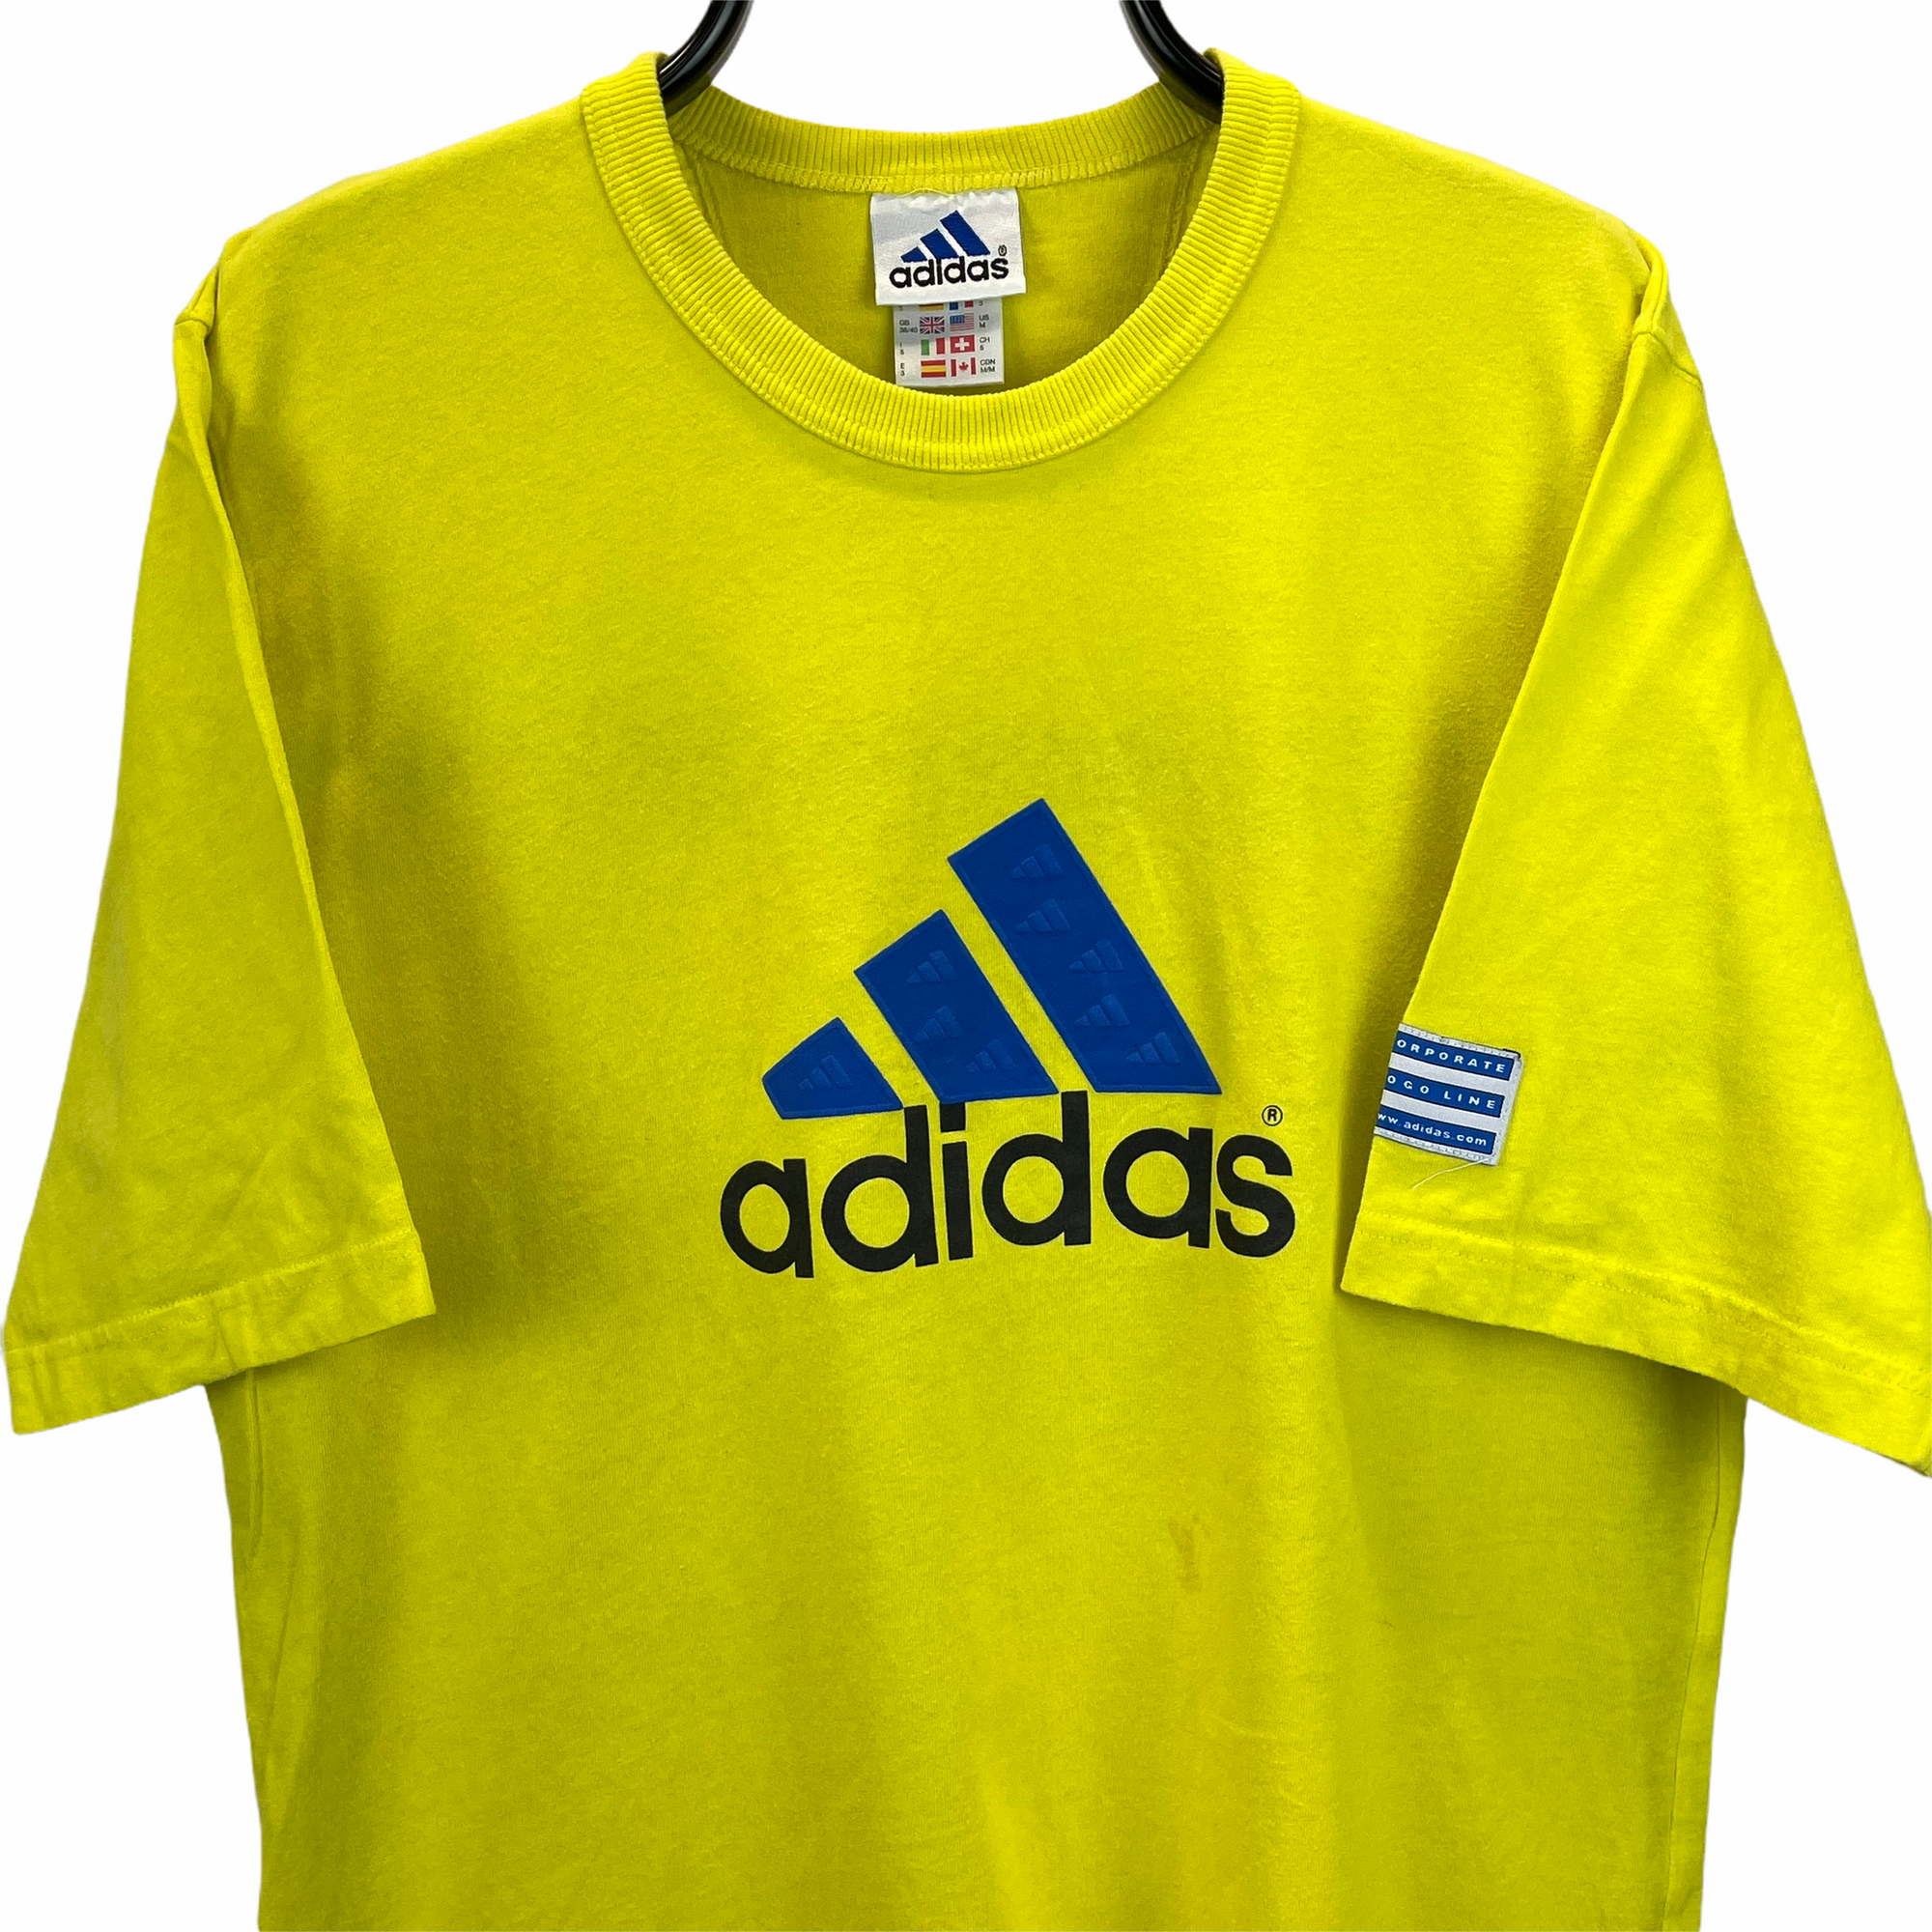 Vintage 90s Adidas Spellout tee in Yellow & Blue - Men's Large/Women's XL